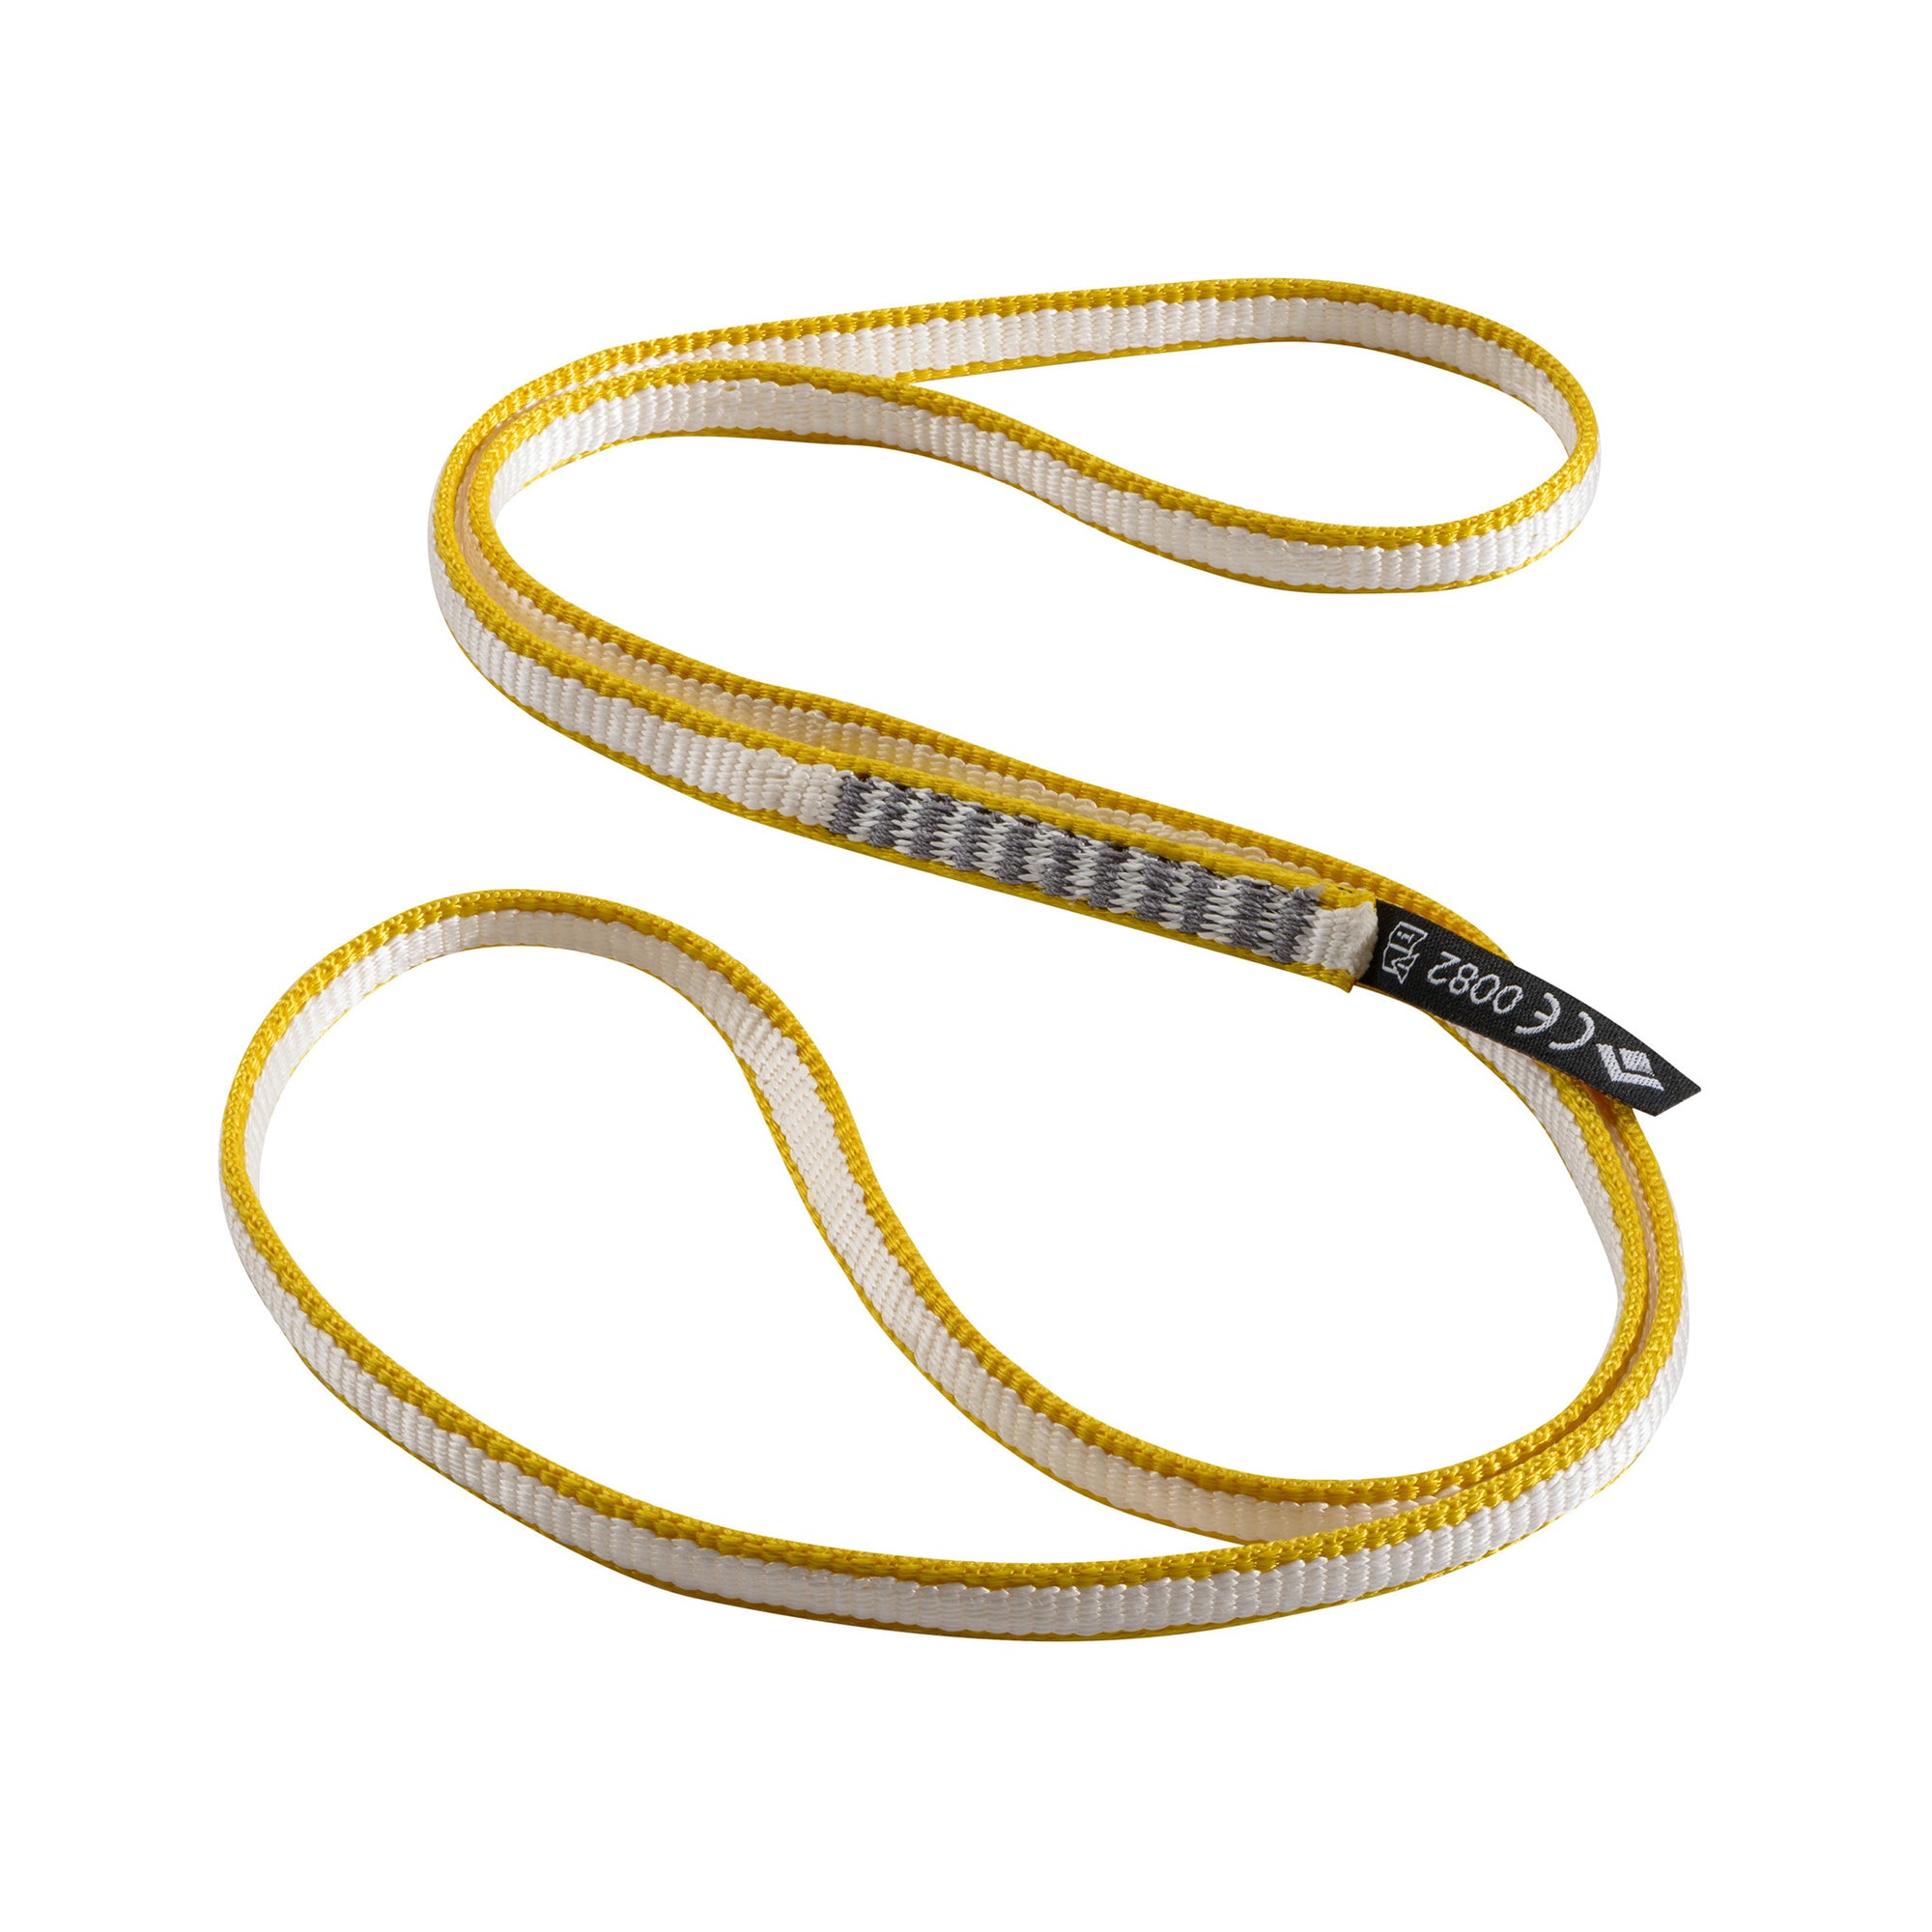 a photo of a black diamond 10mm dynex runner in the 60cm yellow size